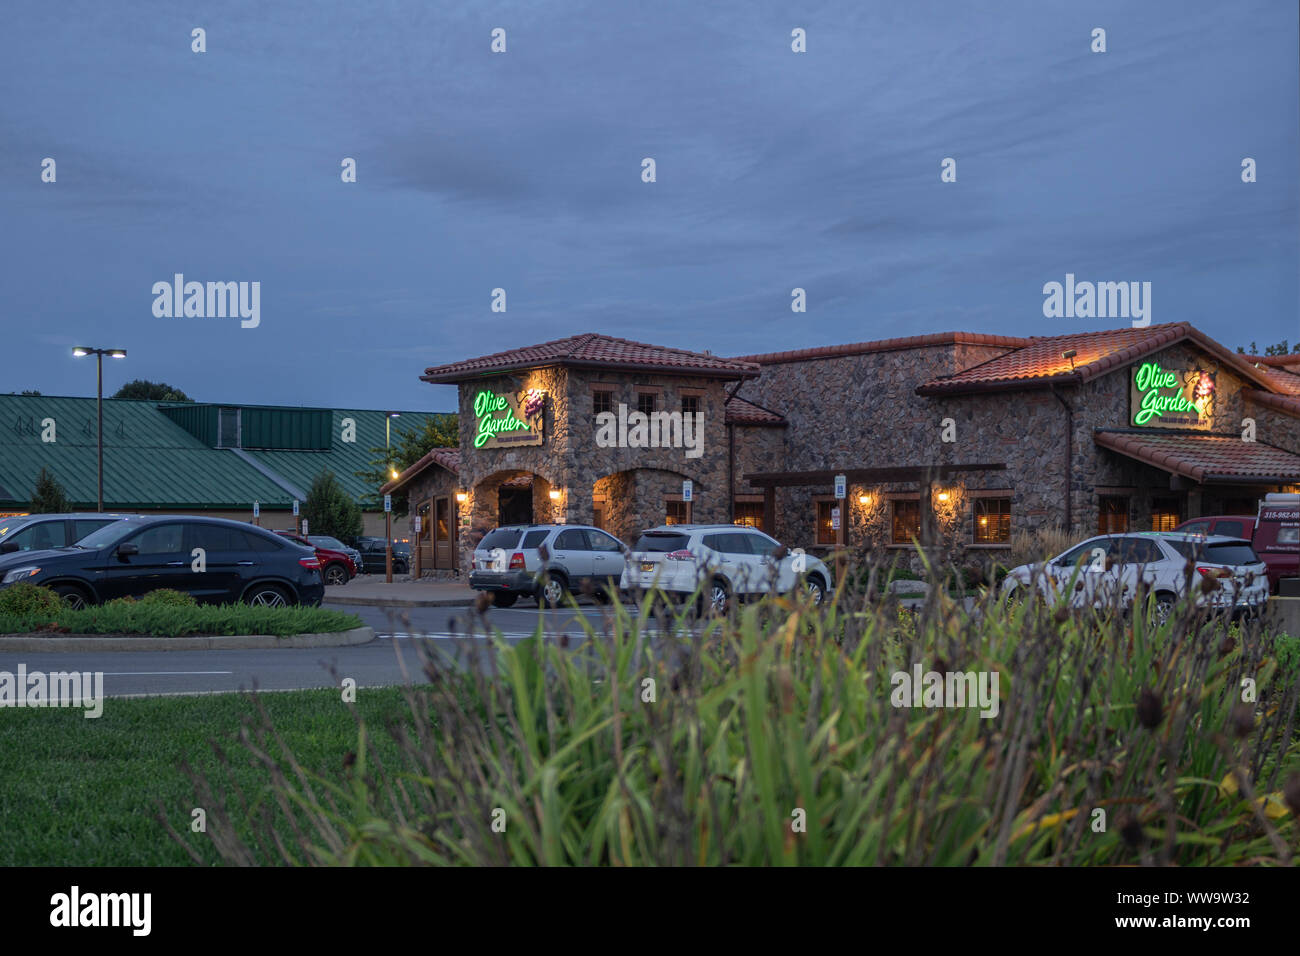 New Hartford, NY - SEPTEMBER 09, 2019: Exterior of Olive Garden Italian Kitchen Restaurant Location. Olive Garden is a chain restaurant that offers ca Stock Photo